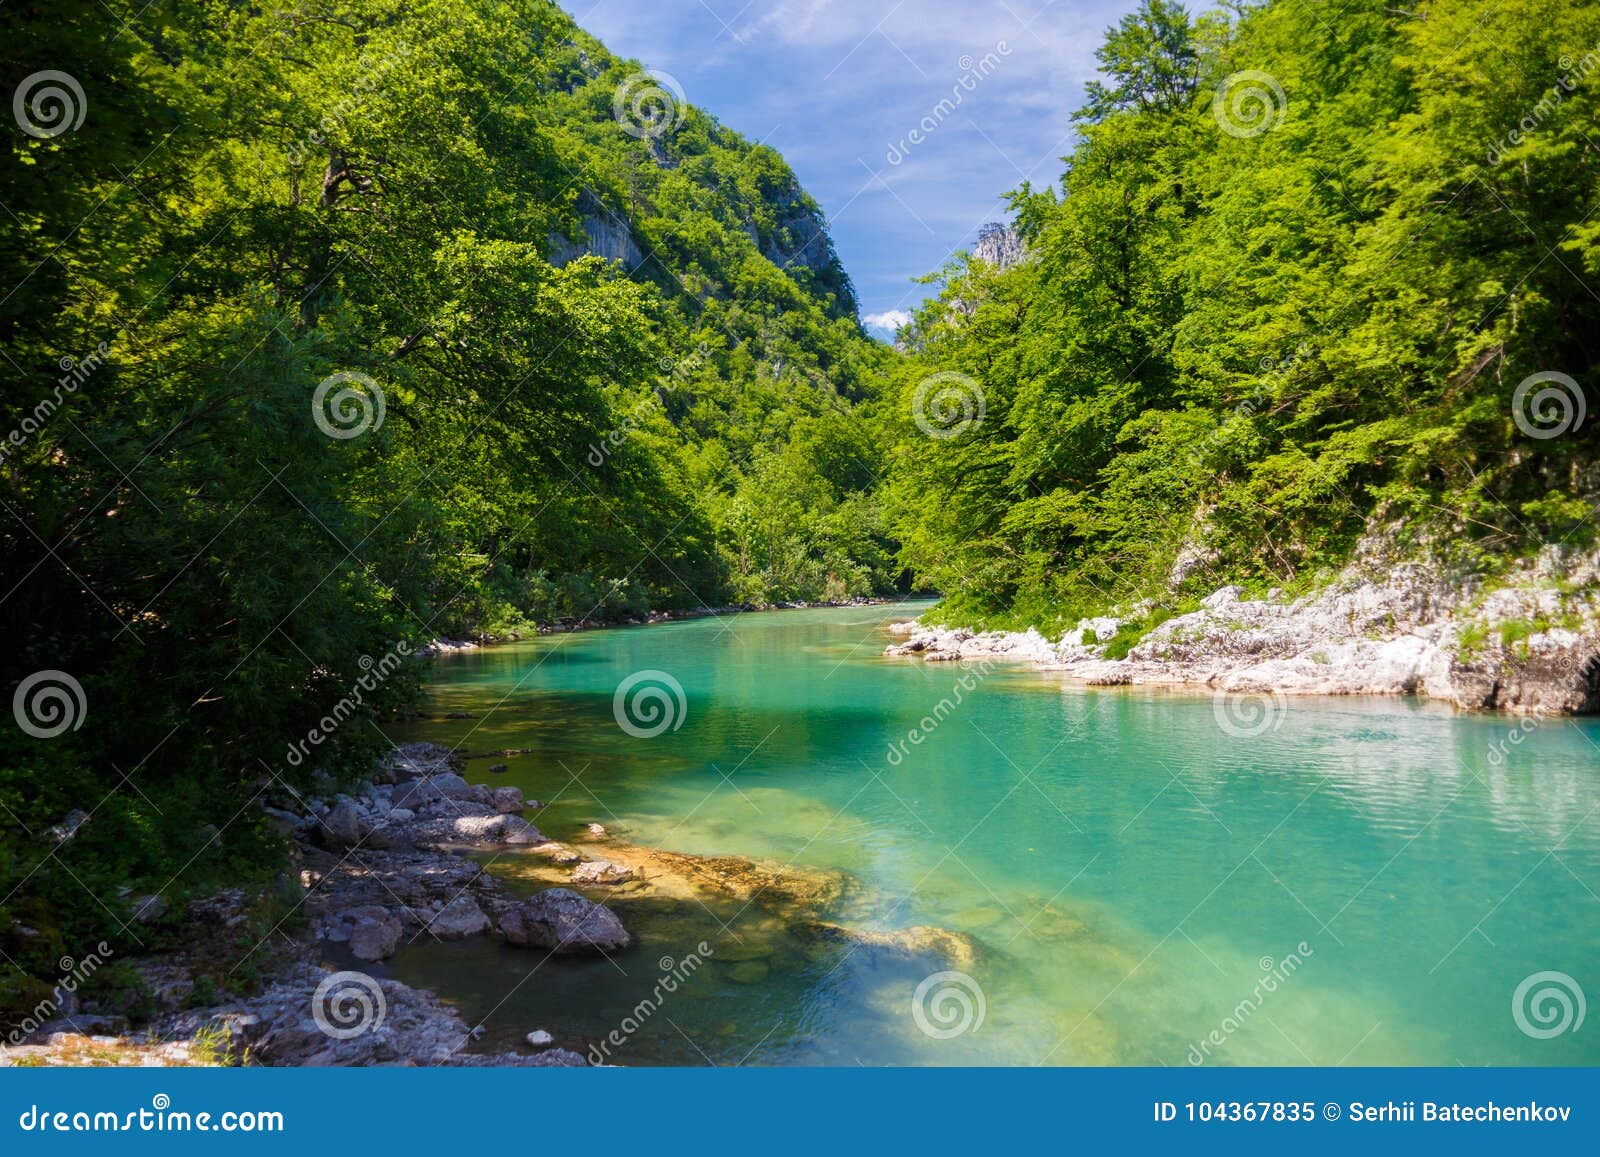 Mountain River With Crystal Clear Water Among The Green Mountains Stock